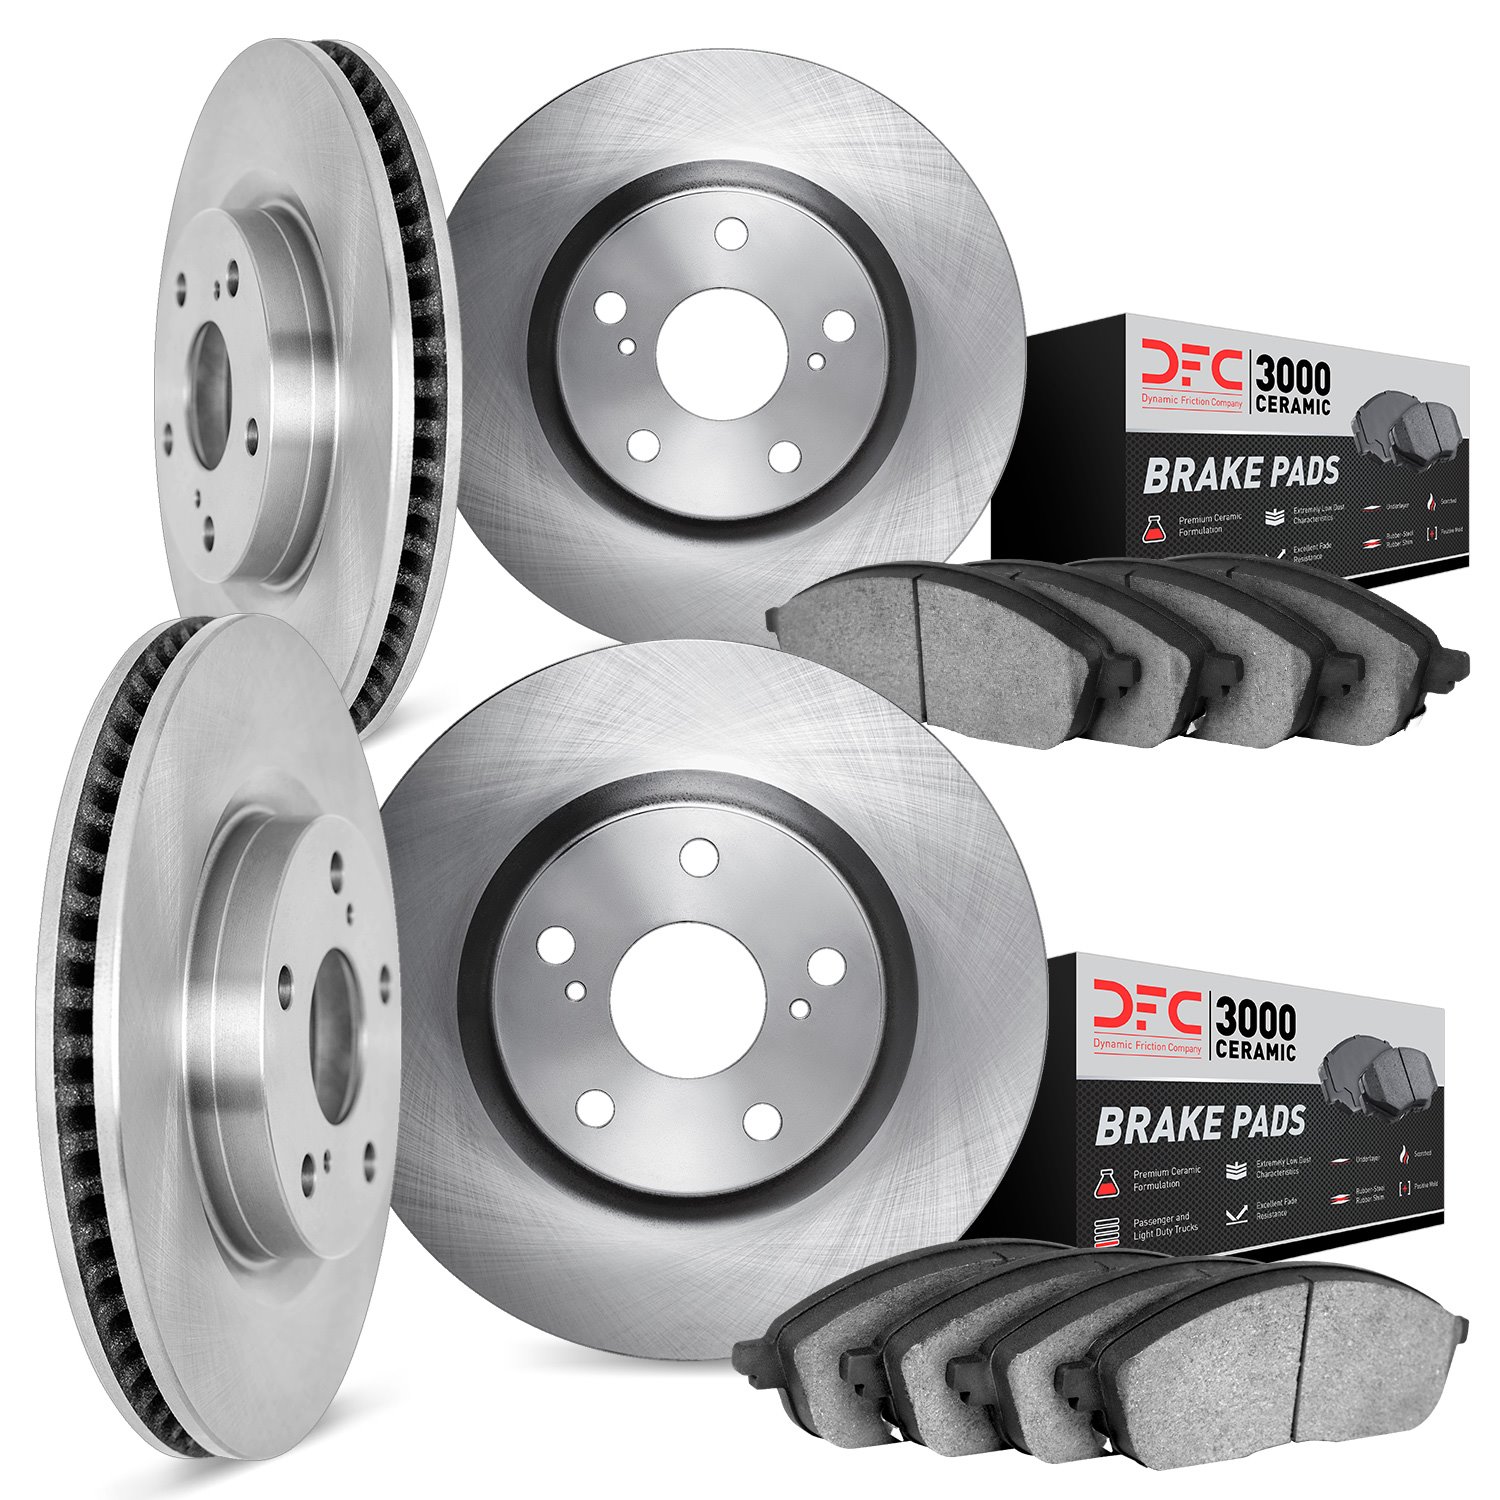 6304-02013 Brake Rotors with 3000-Series Ceramic Brake Pads Kit, 1986-1991 Porsche, Position: Front and Rear